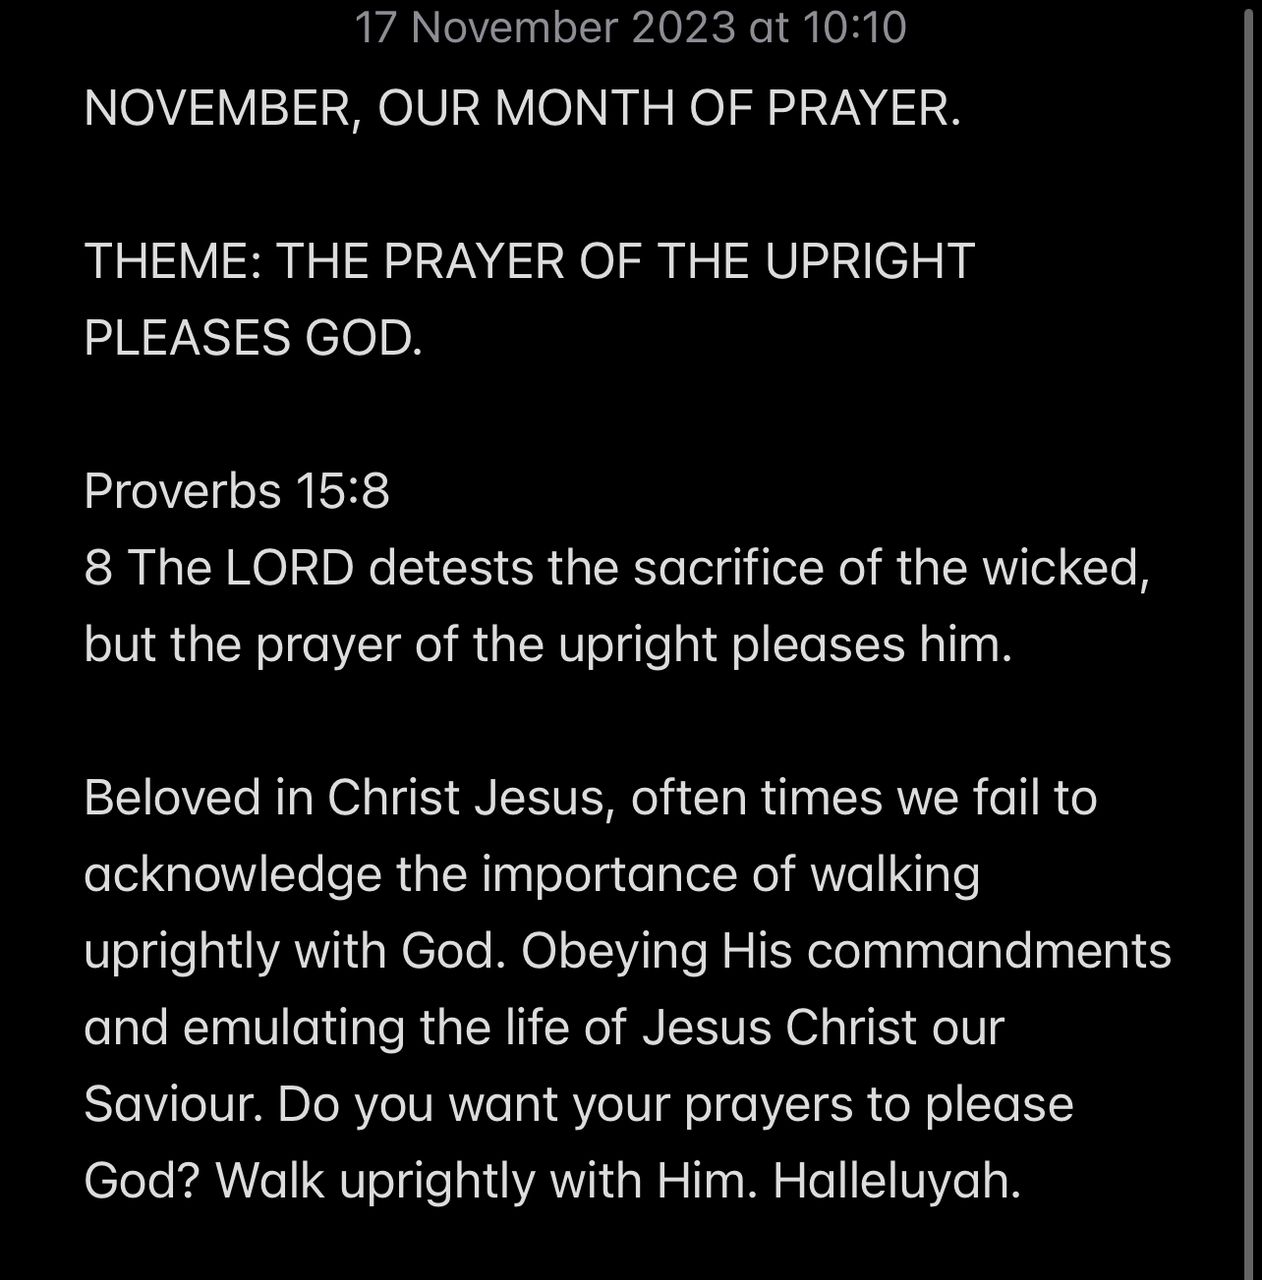 THE PRAYER OF THE UPRIGHT PLEASES GOD.